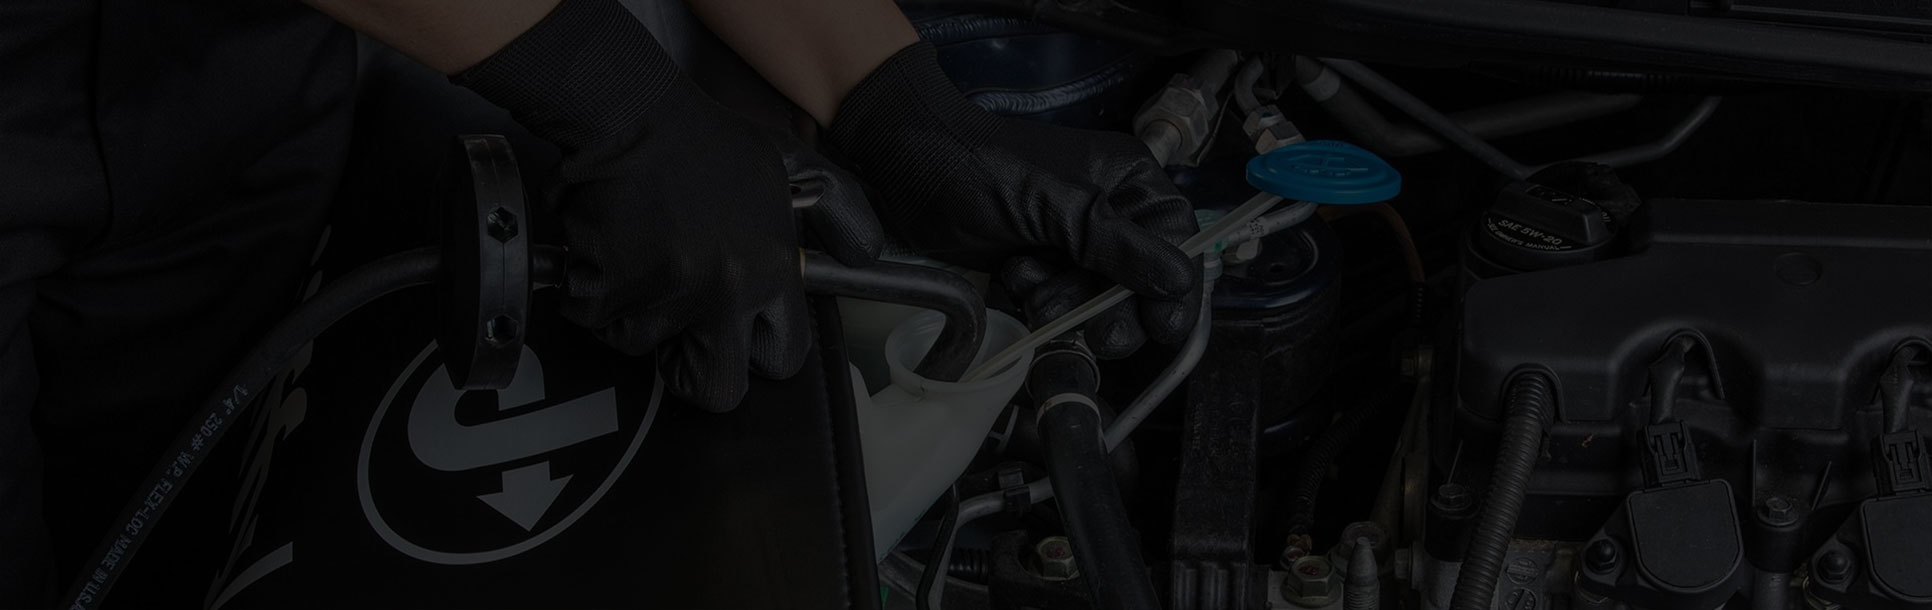 Fluid Replacement and Exchange Services - Transmission Fluid Change Near Me